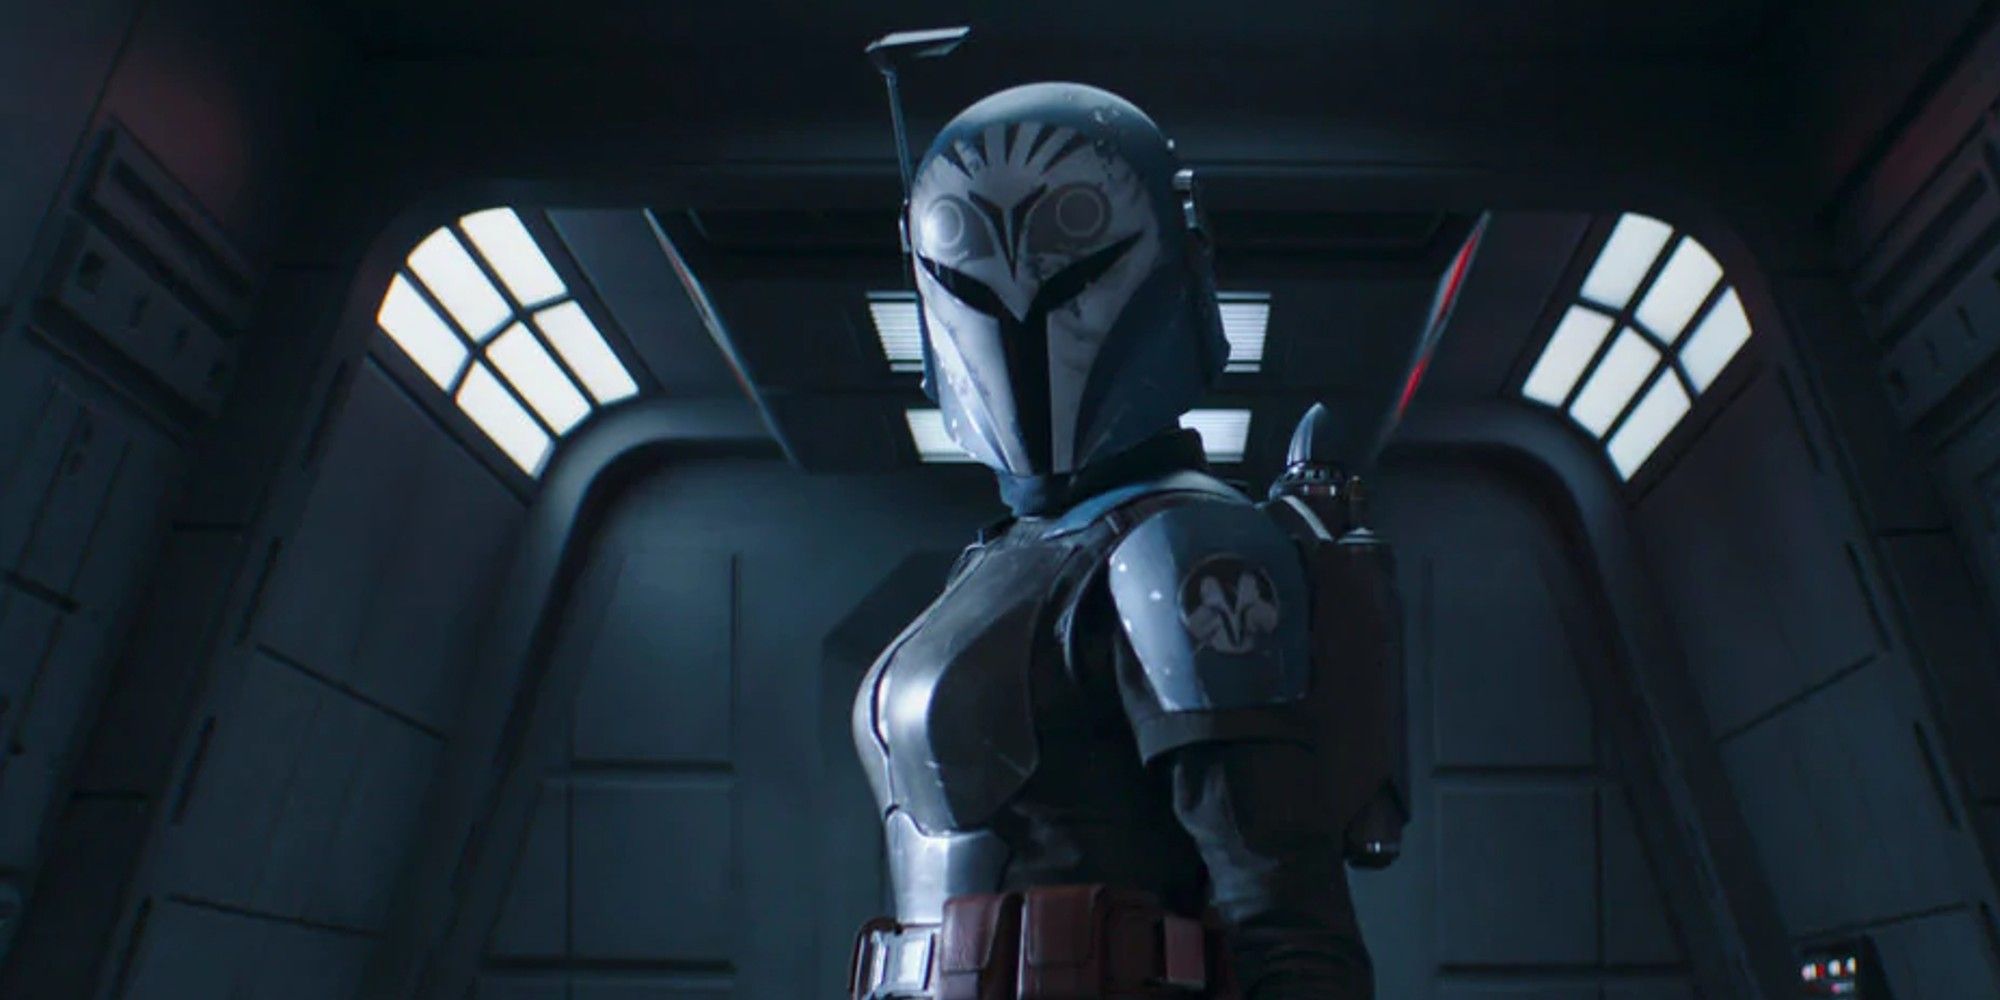 Bo-Katan Kryze in The Mandalorian, looking ahead, arm outstretched.